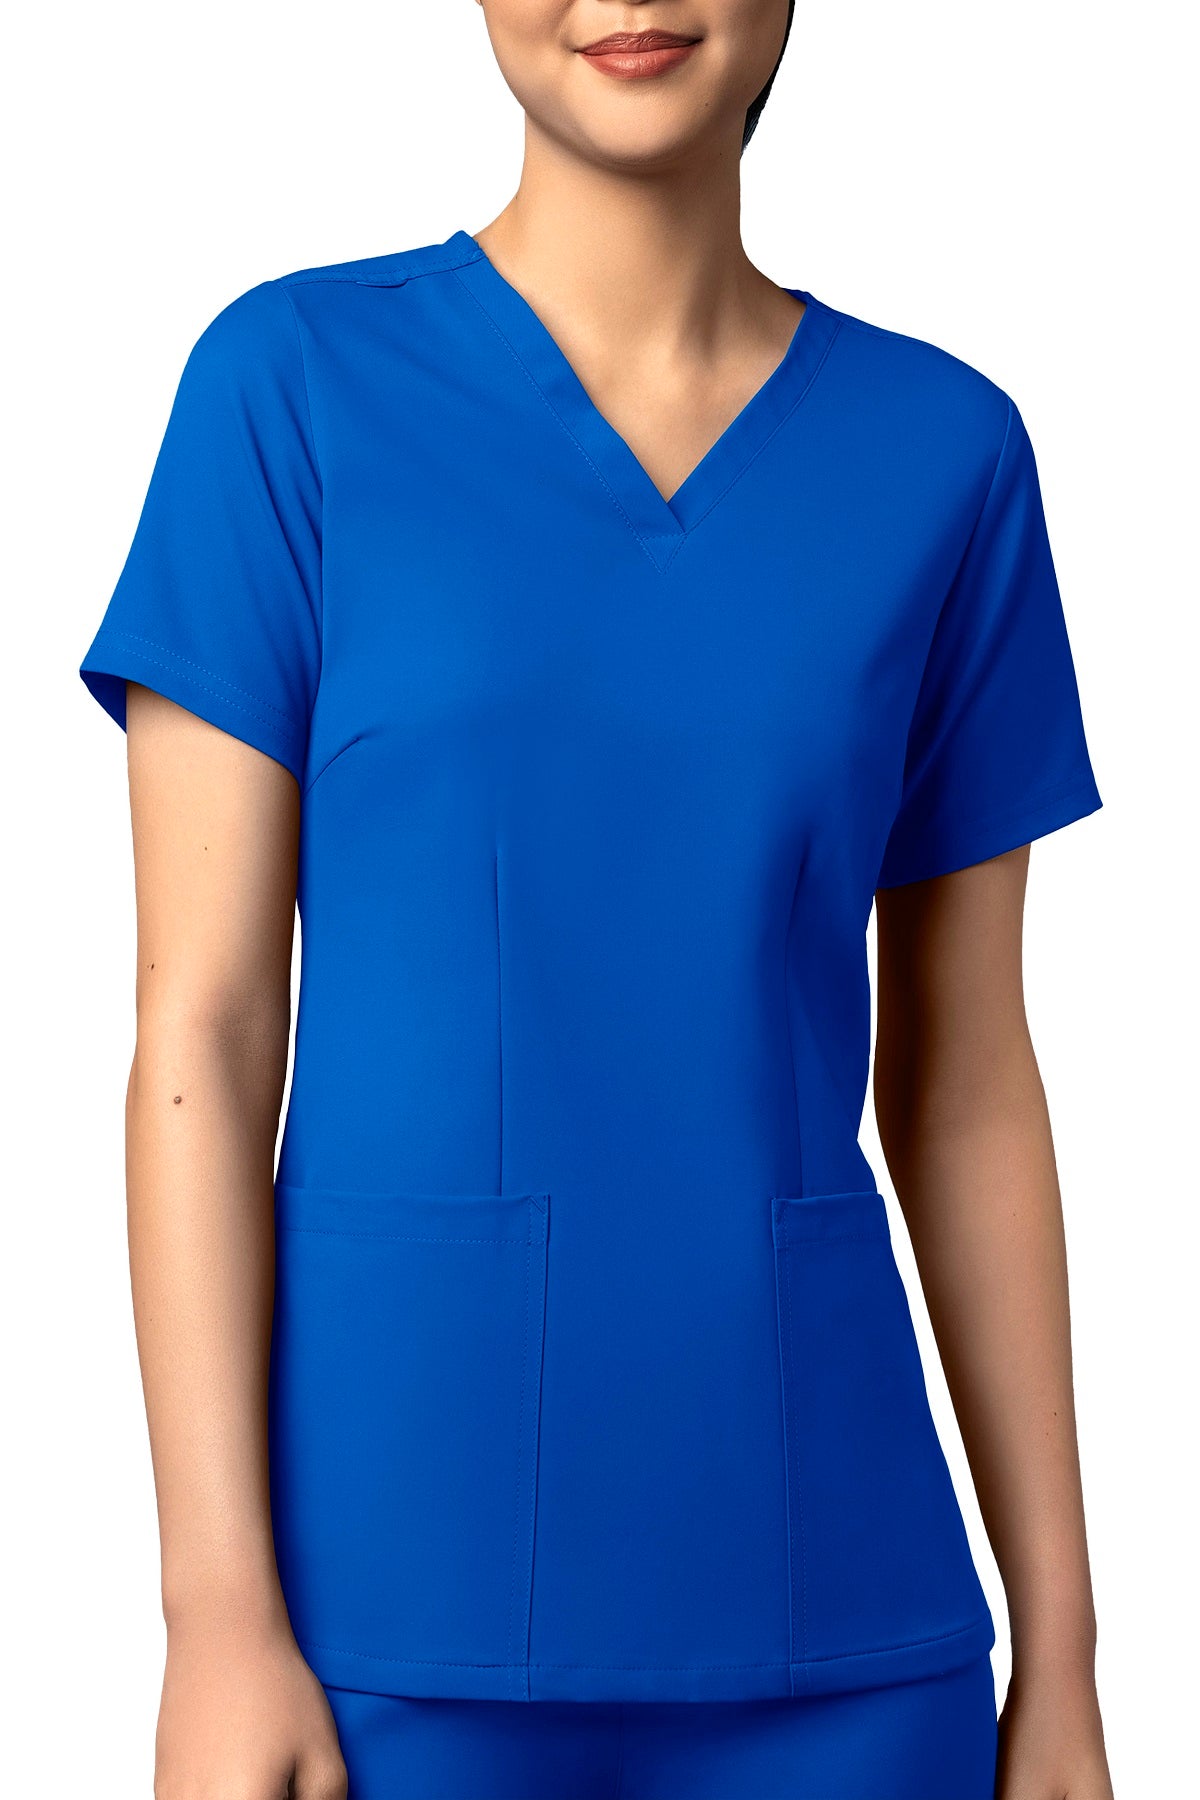 WonderWink Scrub Top Thrive Fitted 3-Pocket in royal at Parker's Clothing and Shoes.